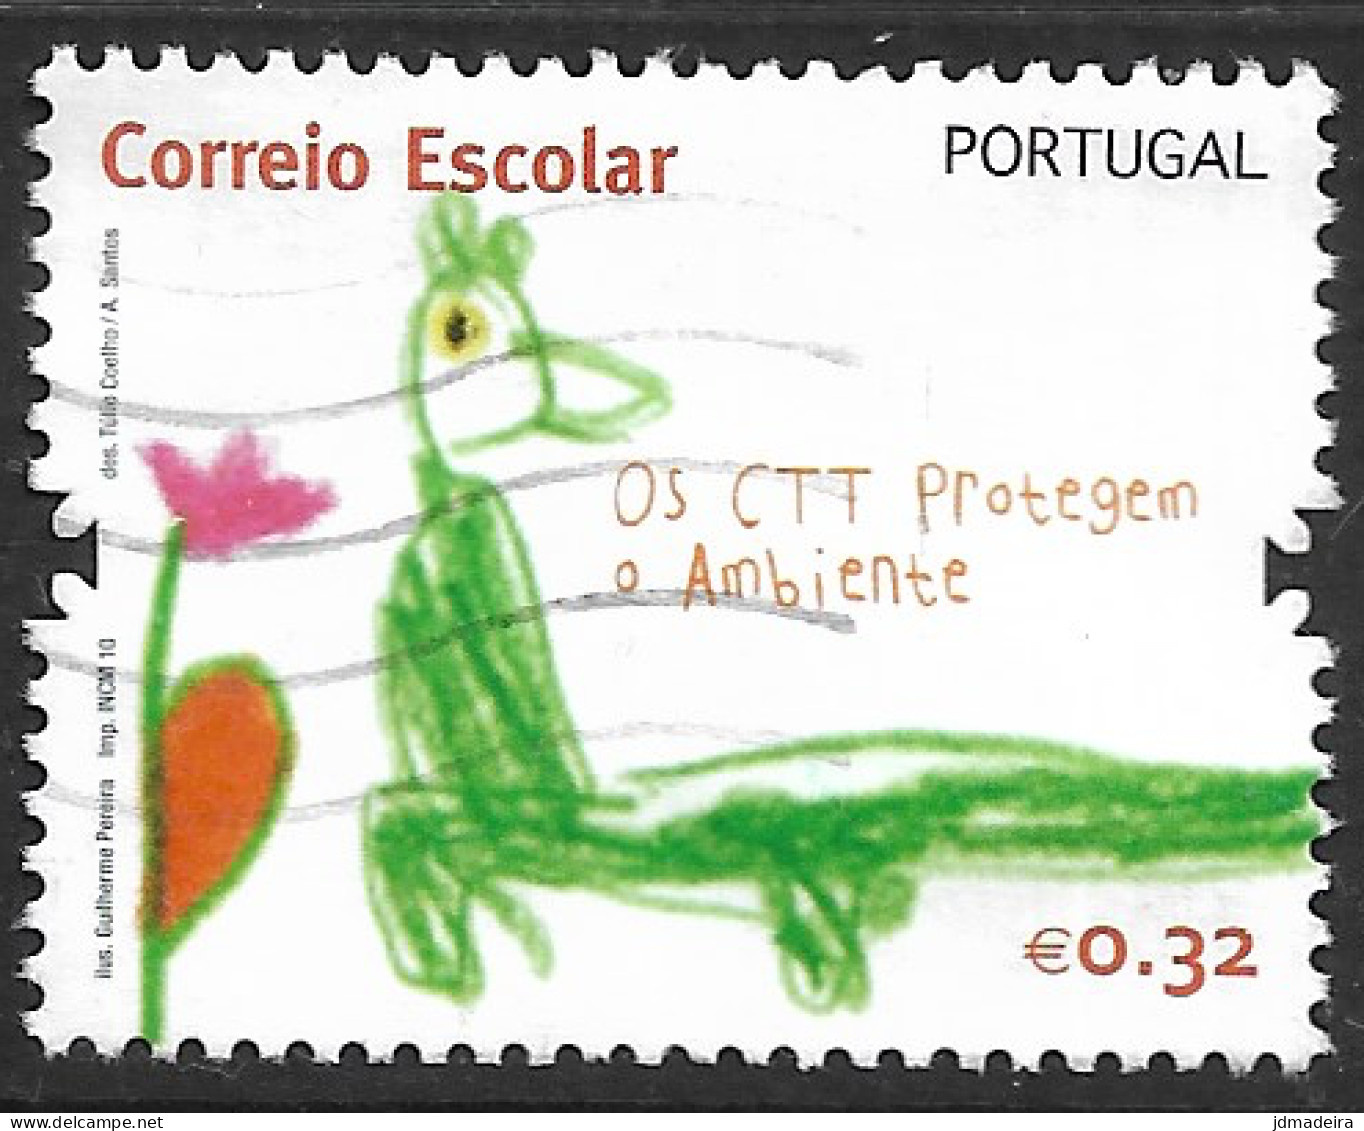 Portugal – 2010 School Mail 0,32 Used Stamp - Used Stamps